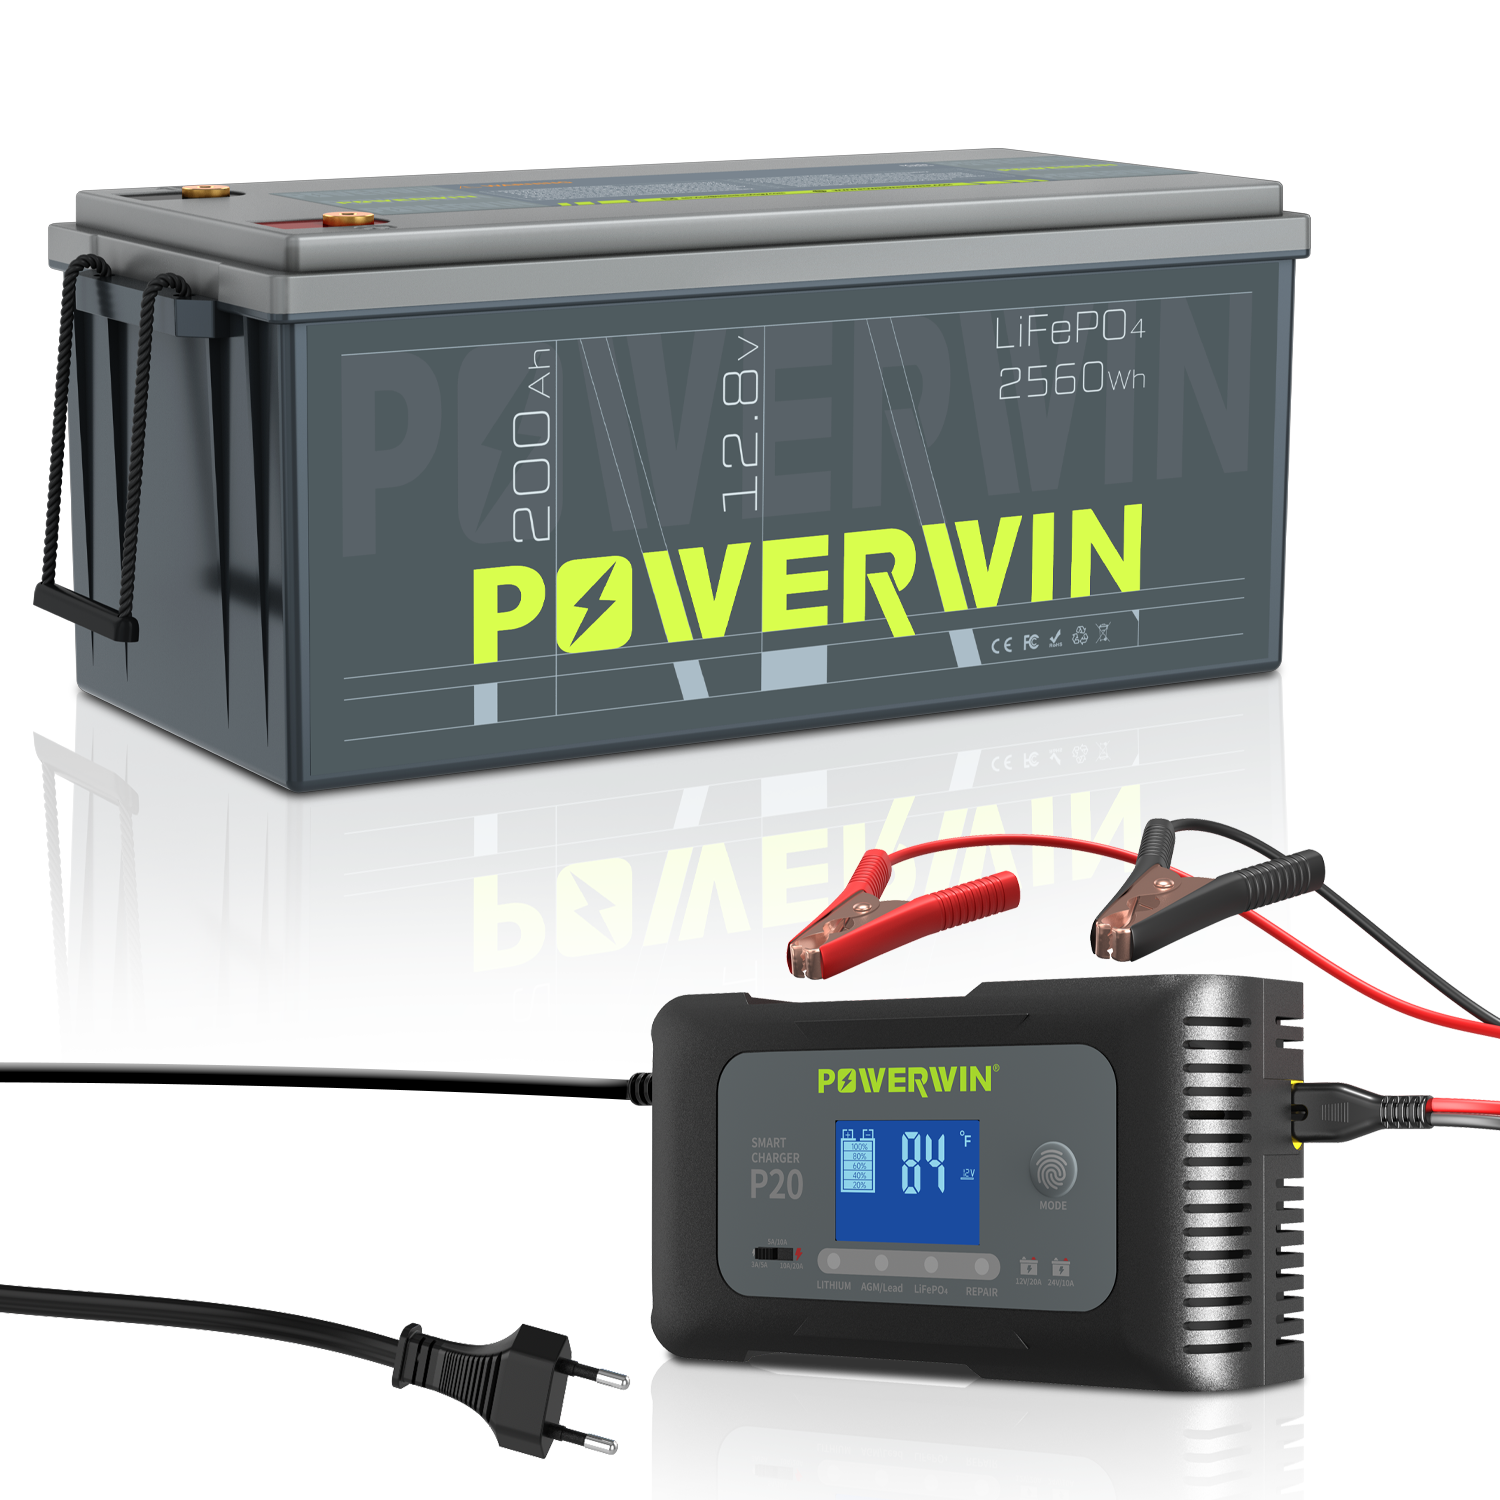 POWERWIN 12V 200Ah LiFePO4 Lithium Battery + Charger Set